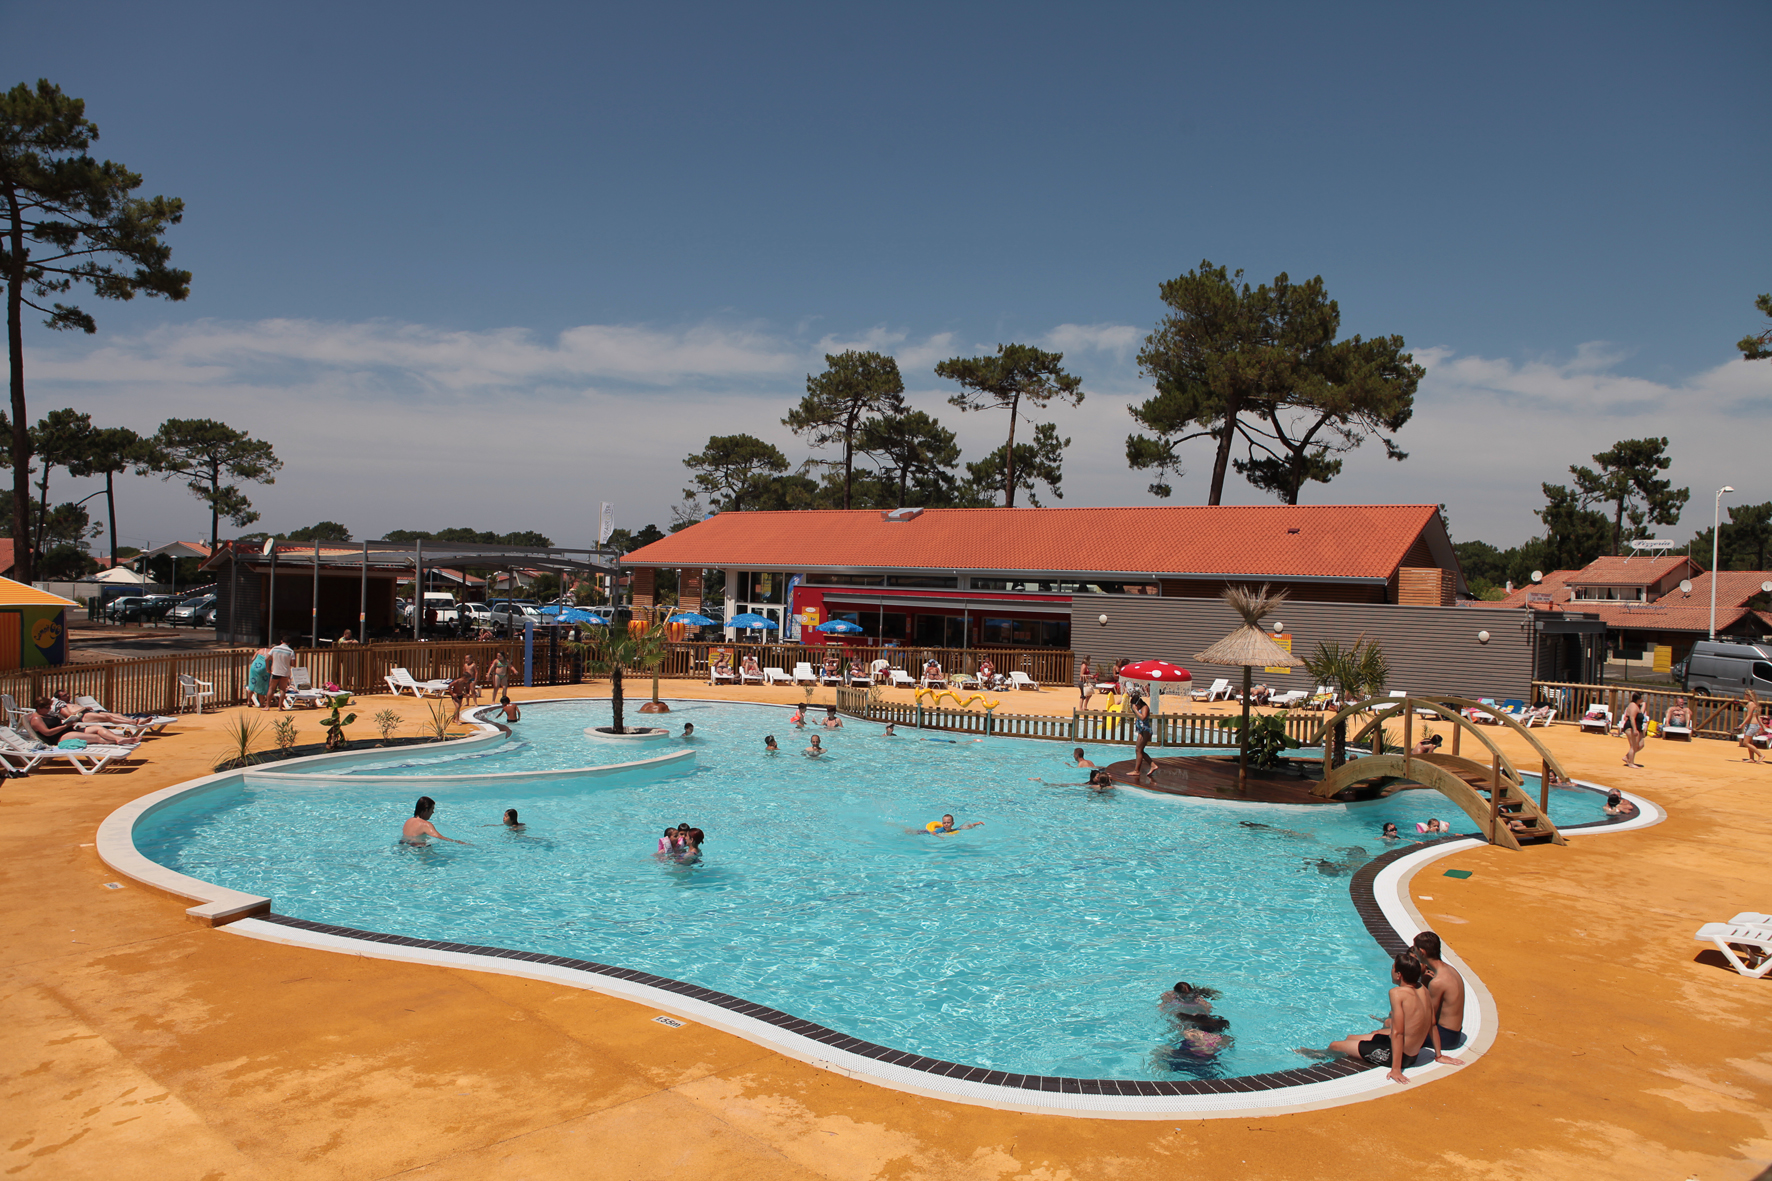 Location vacances Camping Plage Sud - Biscarrosse-2